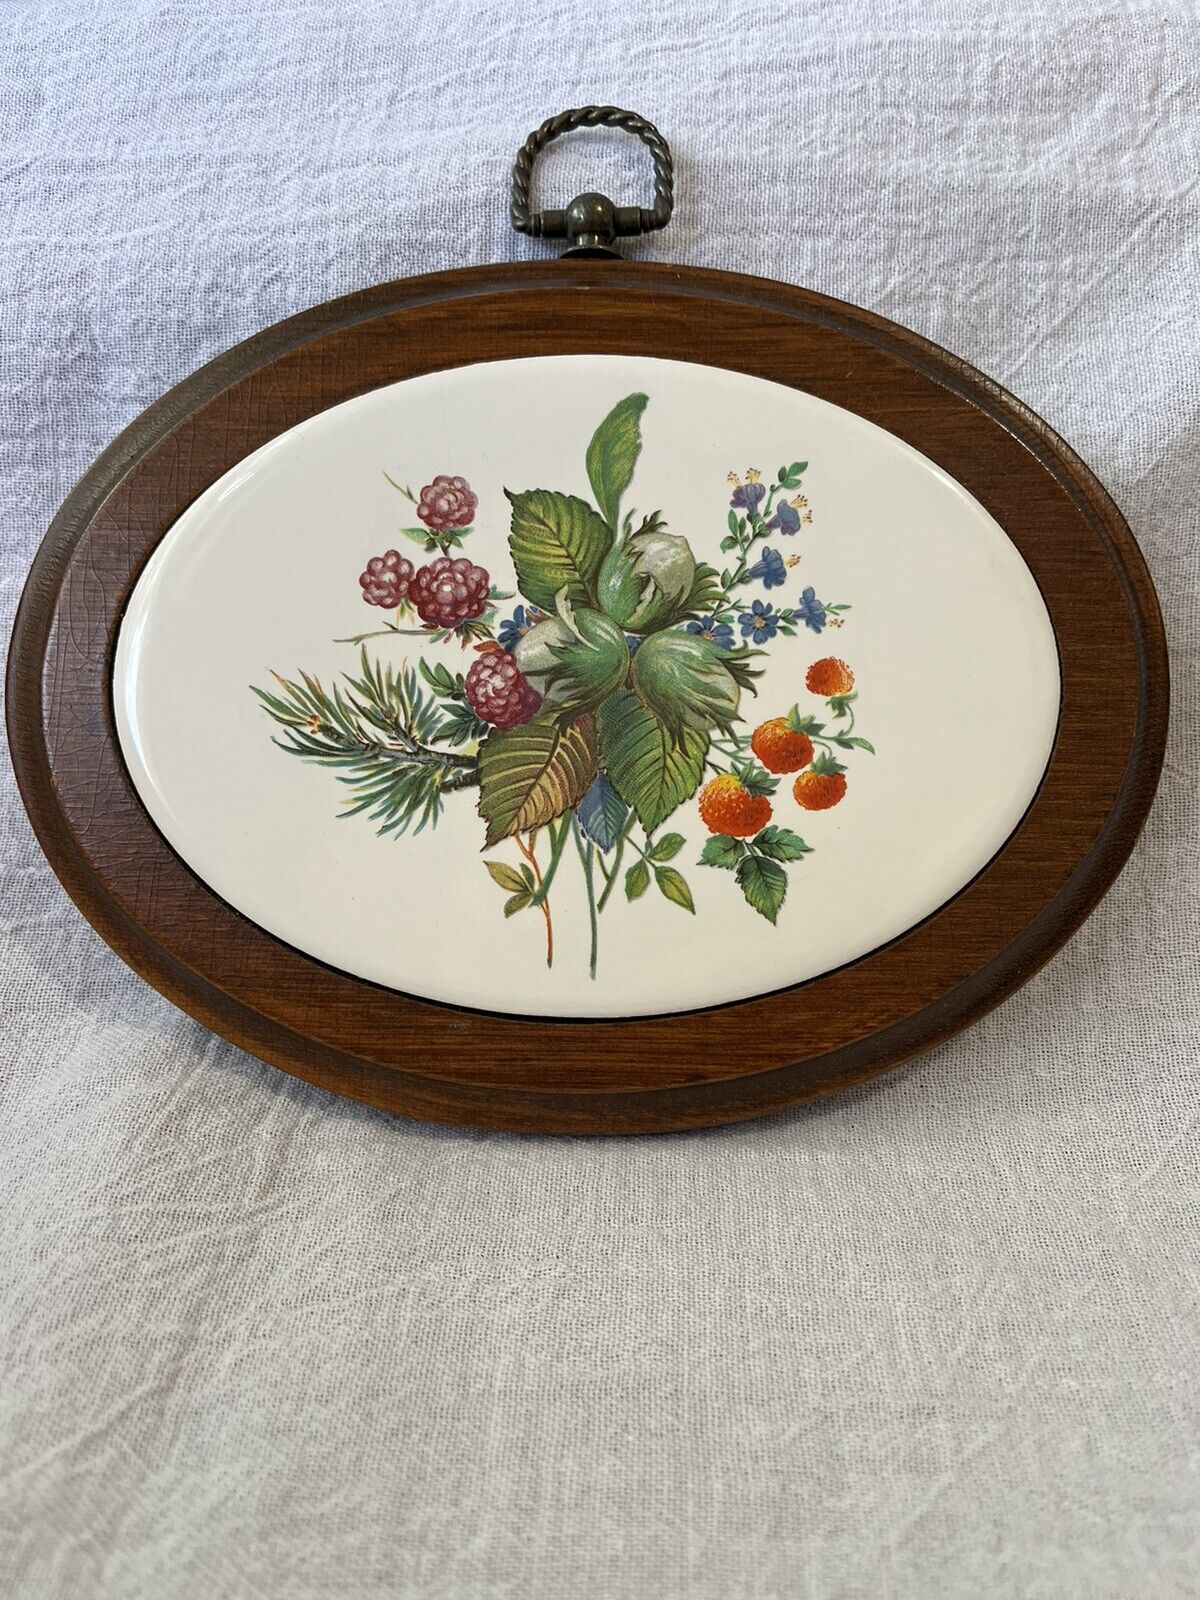 Vintage Wood and Ceramic Oval Plaque Berries and Flowers circa 1970s-1980s